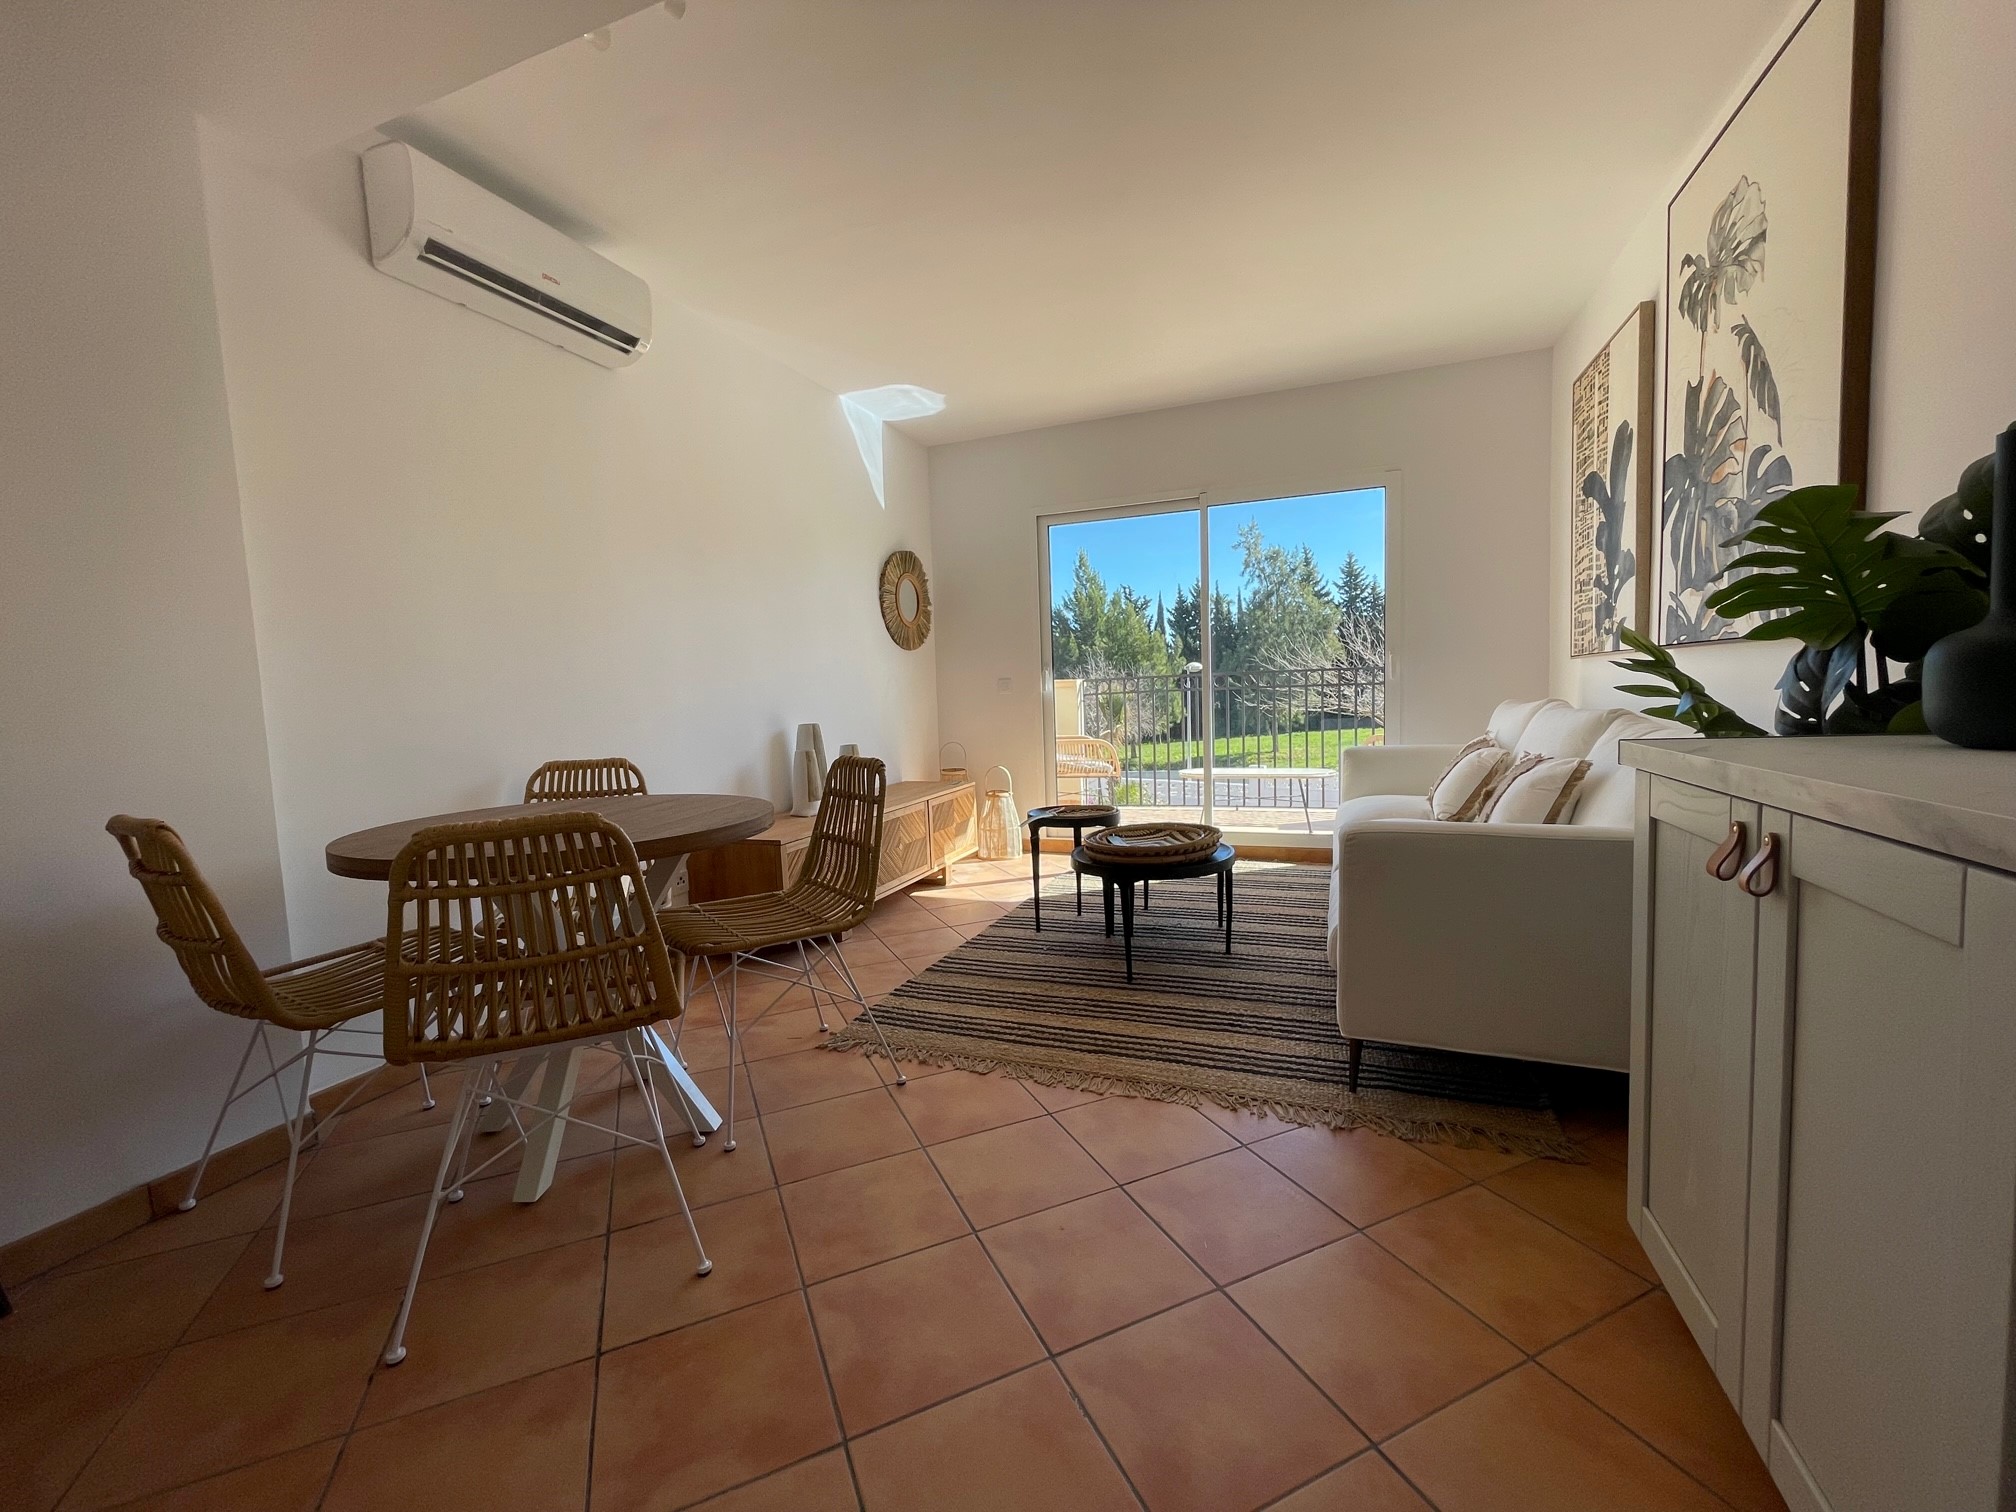 1 bedroom apartment with nice terrace